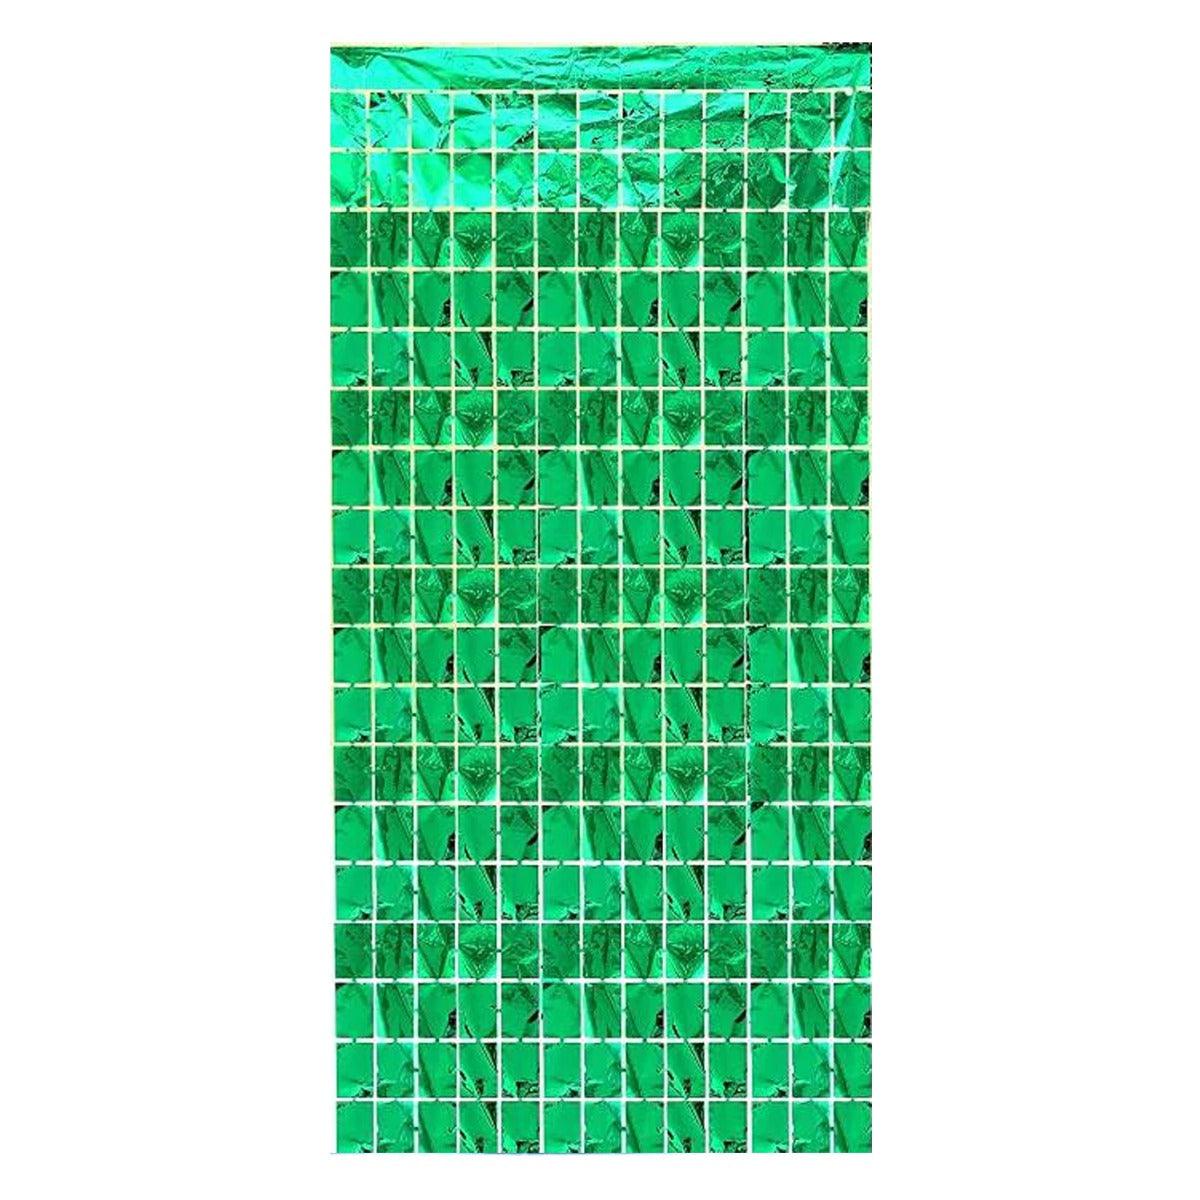 PartyCorp Square Shaped Metallic Green Foil Curtain, 1 Pack